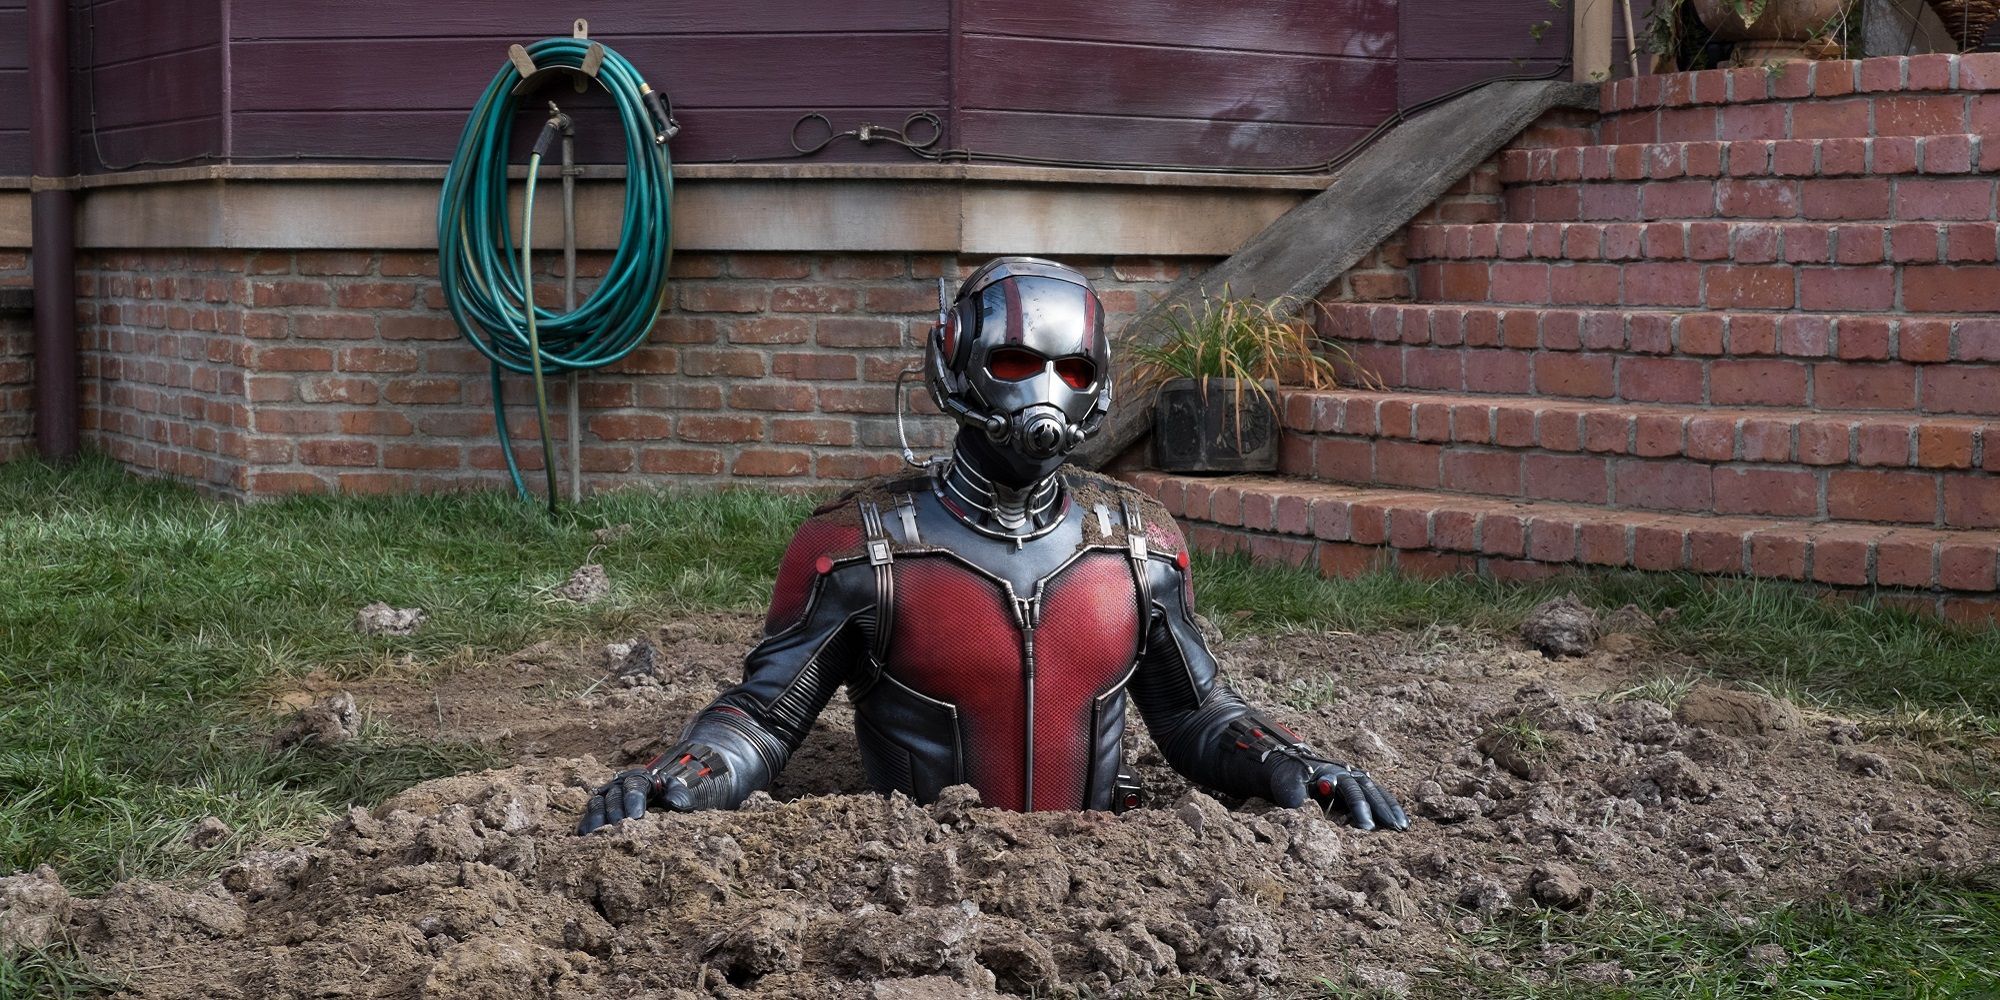 Ant-Man gets stuck in the dirt